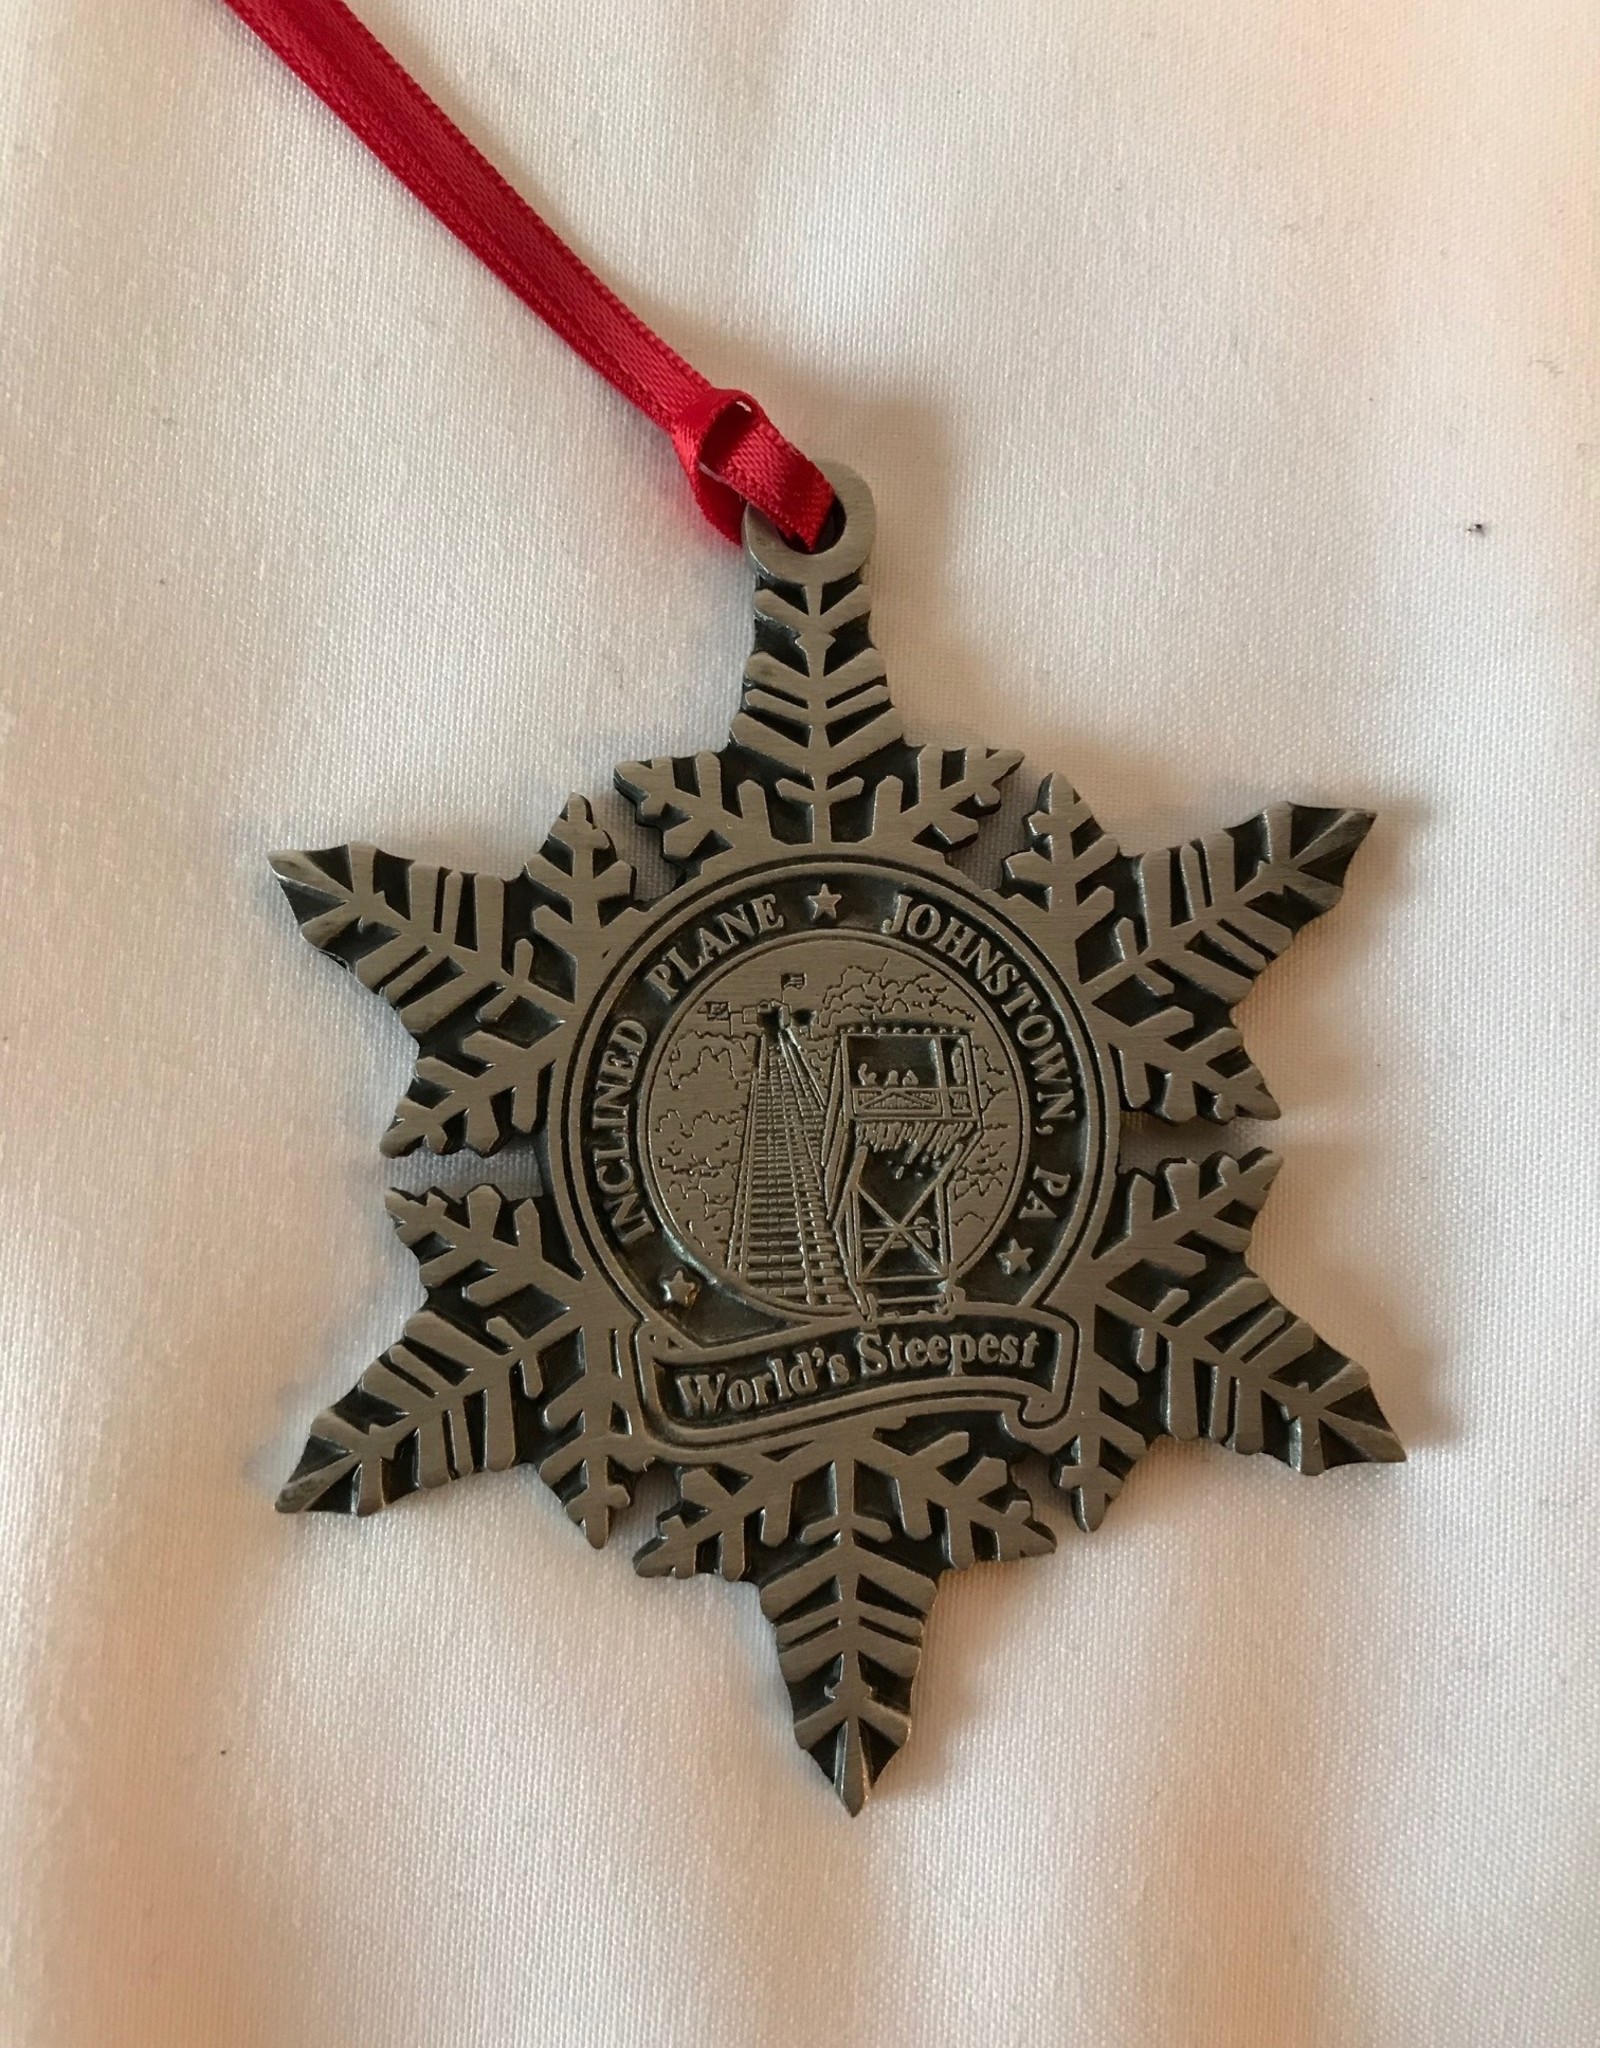 Pewter Snowflake Ornament w/ Inclined Plane Logo